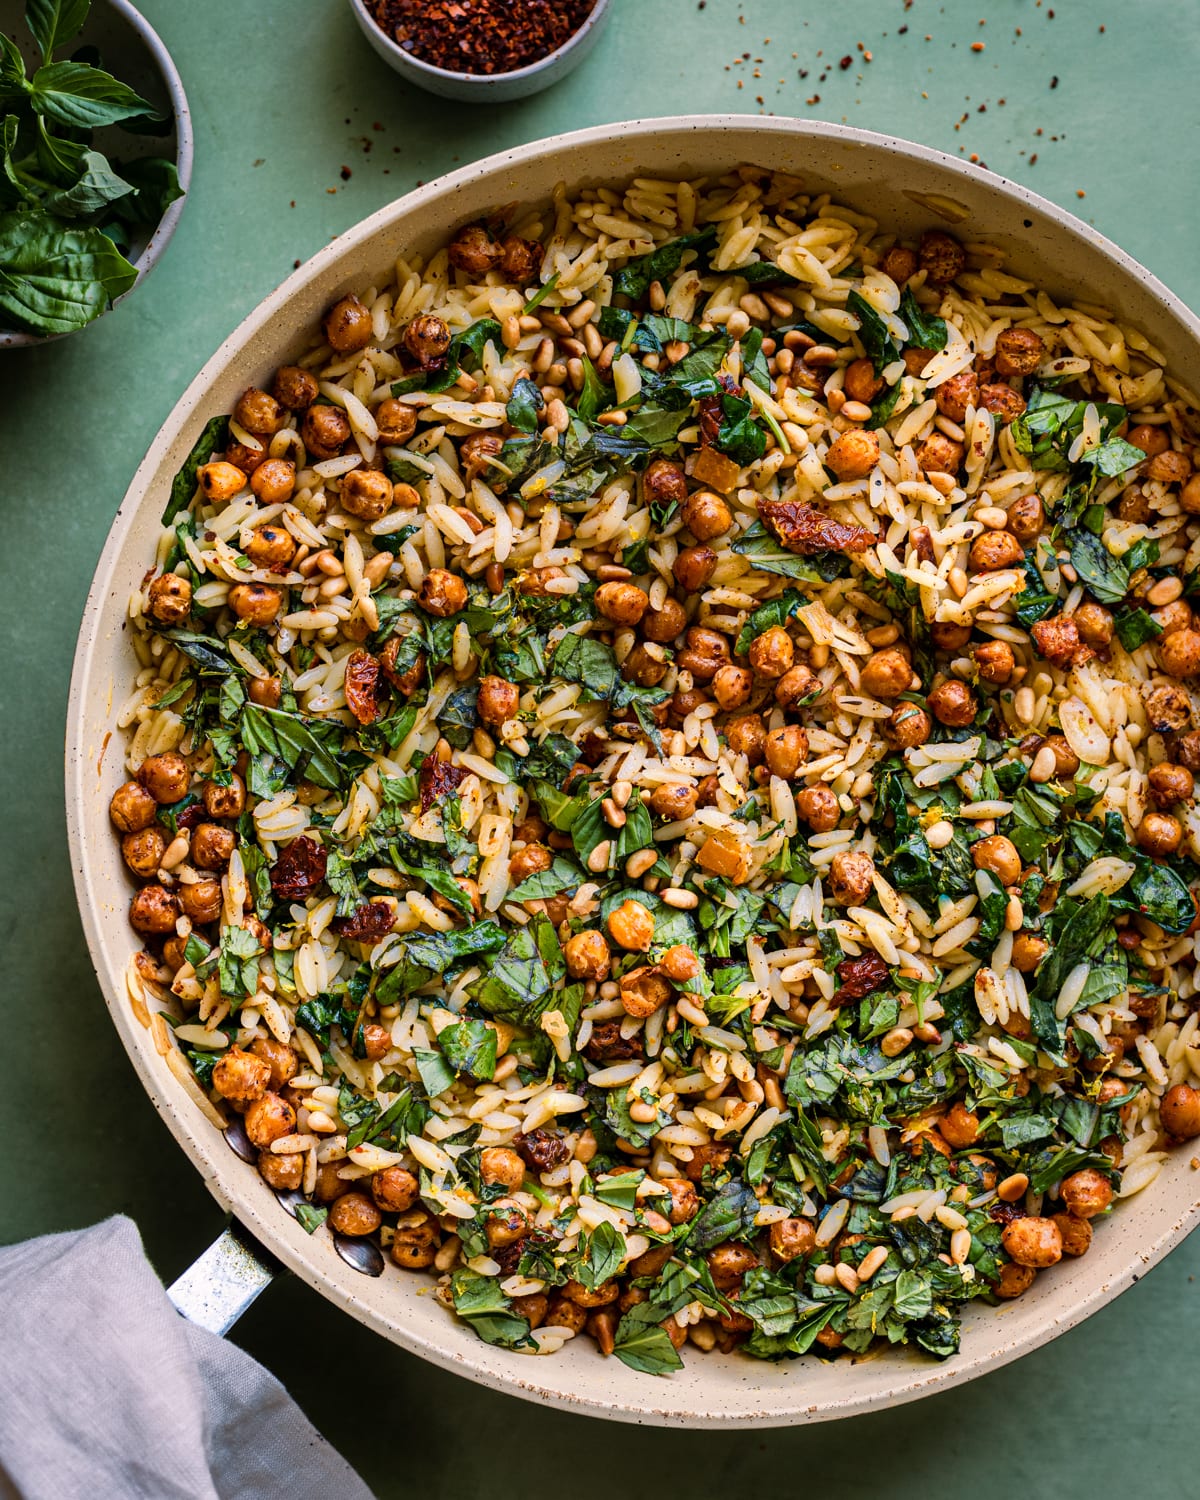 lemon orzo pasta salad with chickpeas in saute pan on green surface